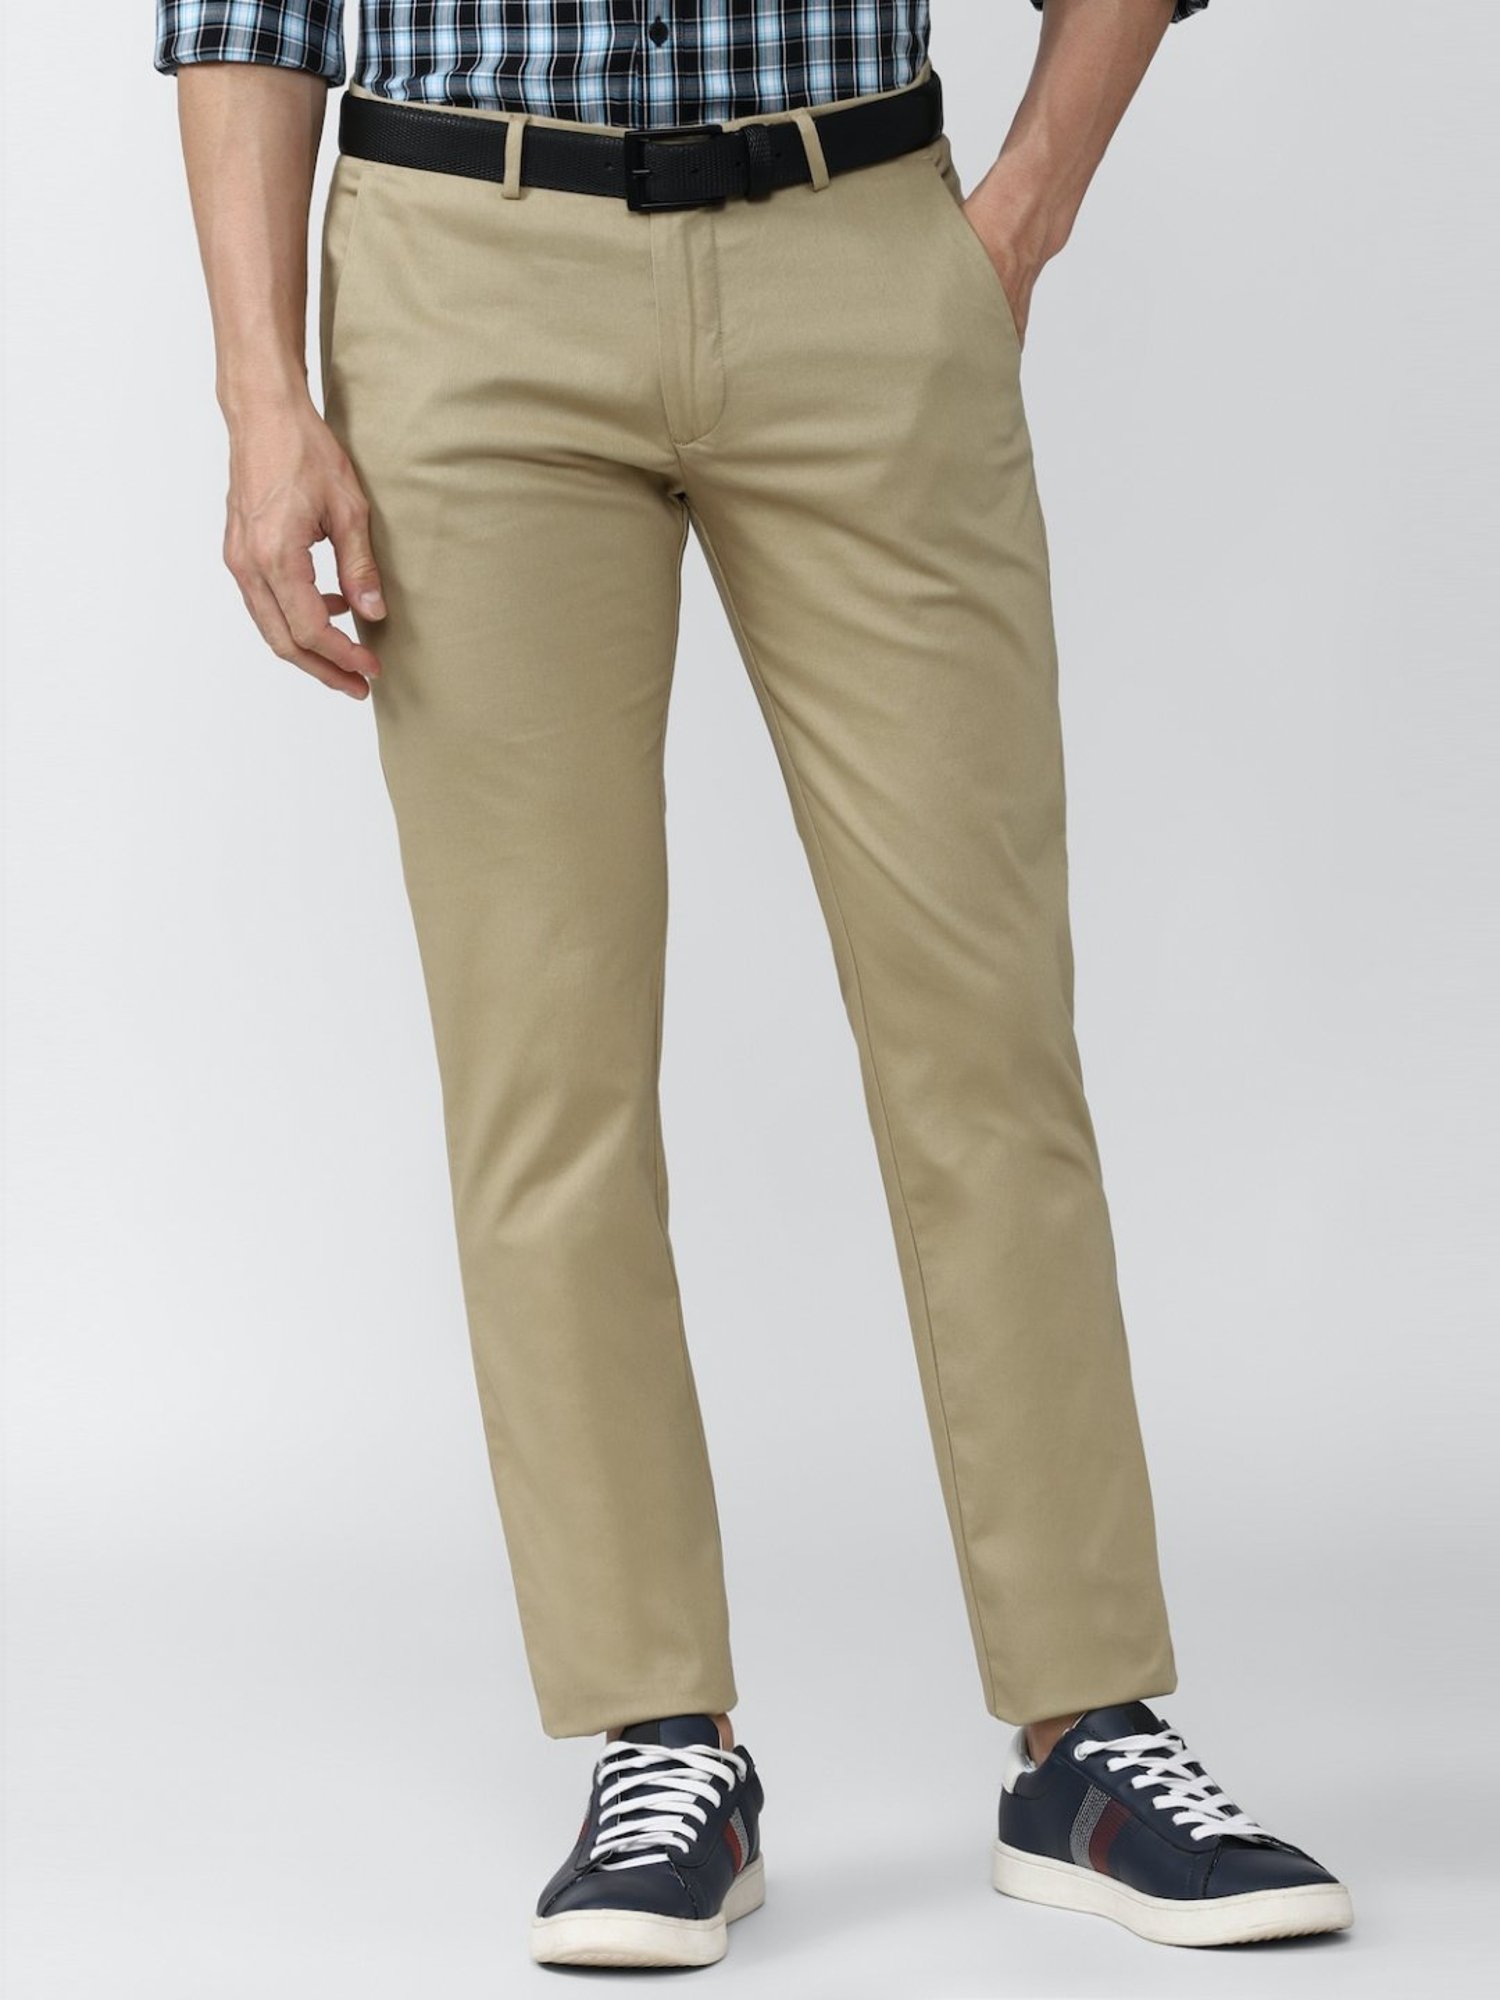 Peter England Chinos : Buy Peter England Khaki Solid Chinos Online | Nykaa  Fashion.